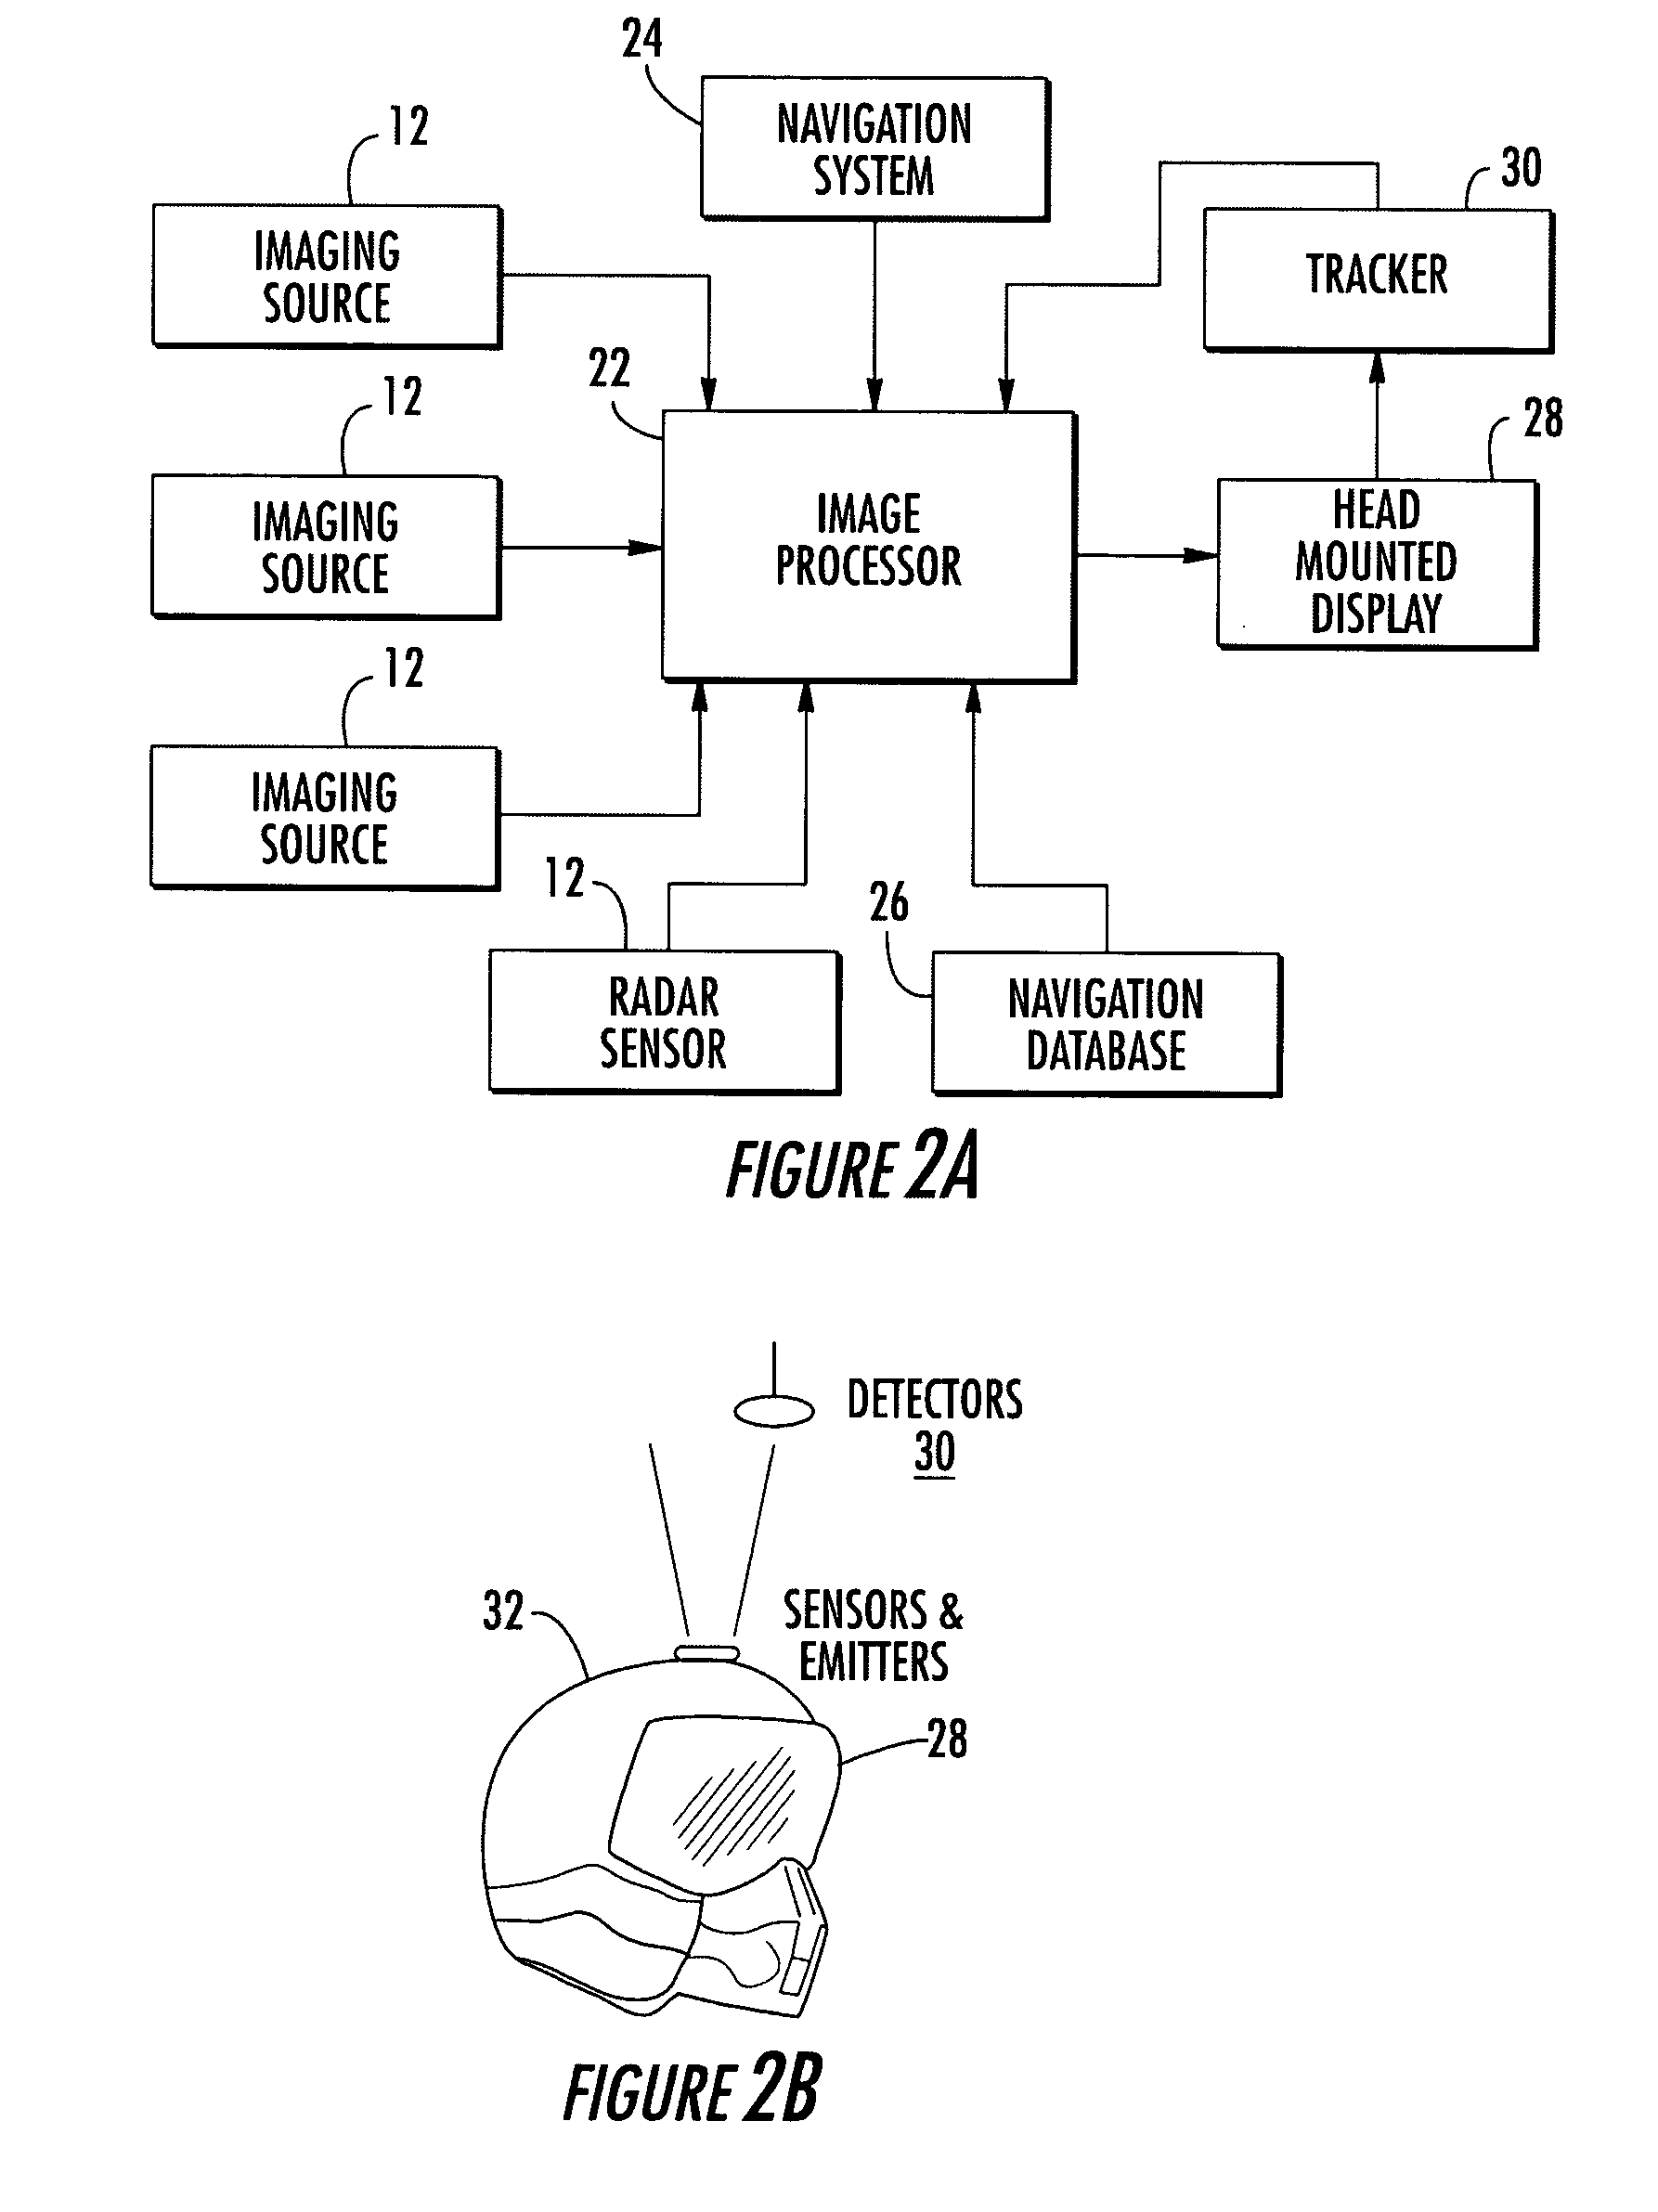 Systems and methods for providing enhanced vision imaging with decreased latency